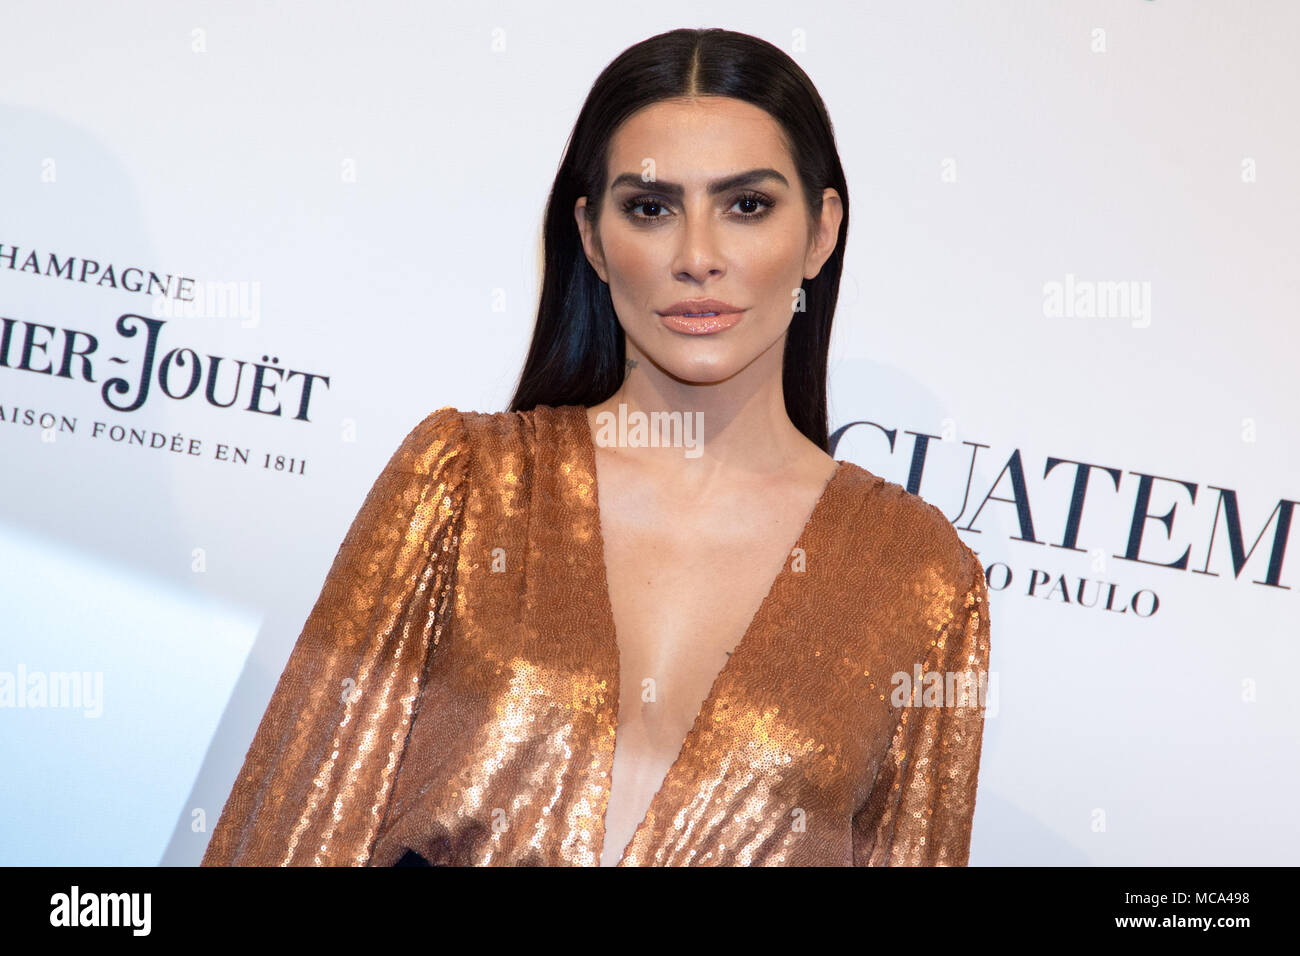 Sao Paulo, Brazil. 13th Apr, 2018. Brazilian actress CLEO PIRES poses on the red carpet of The Foundation for AIDS Research (amfAR) event in Sao Paulo, Brazil Credit: Paulo Lopes/ZUMA Wire/Alamy Live News Stock Photo